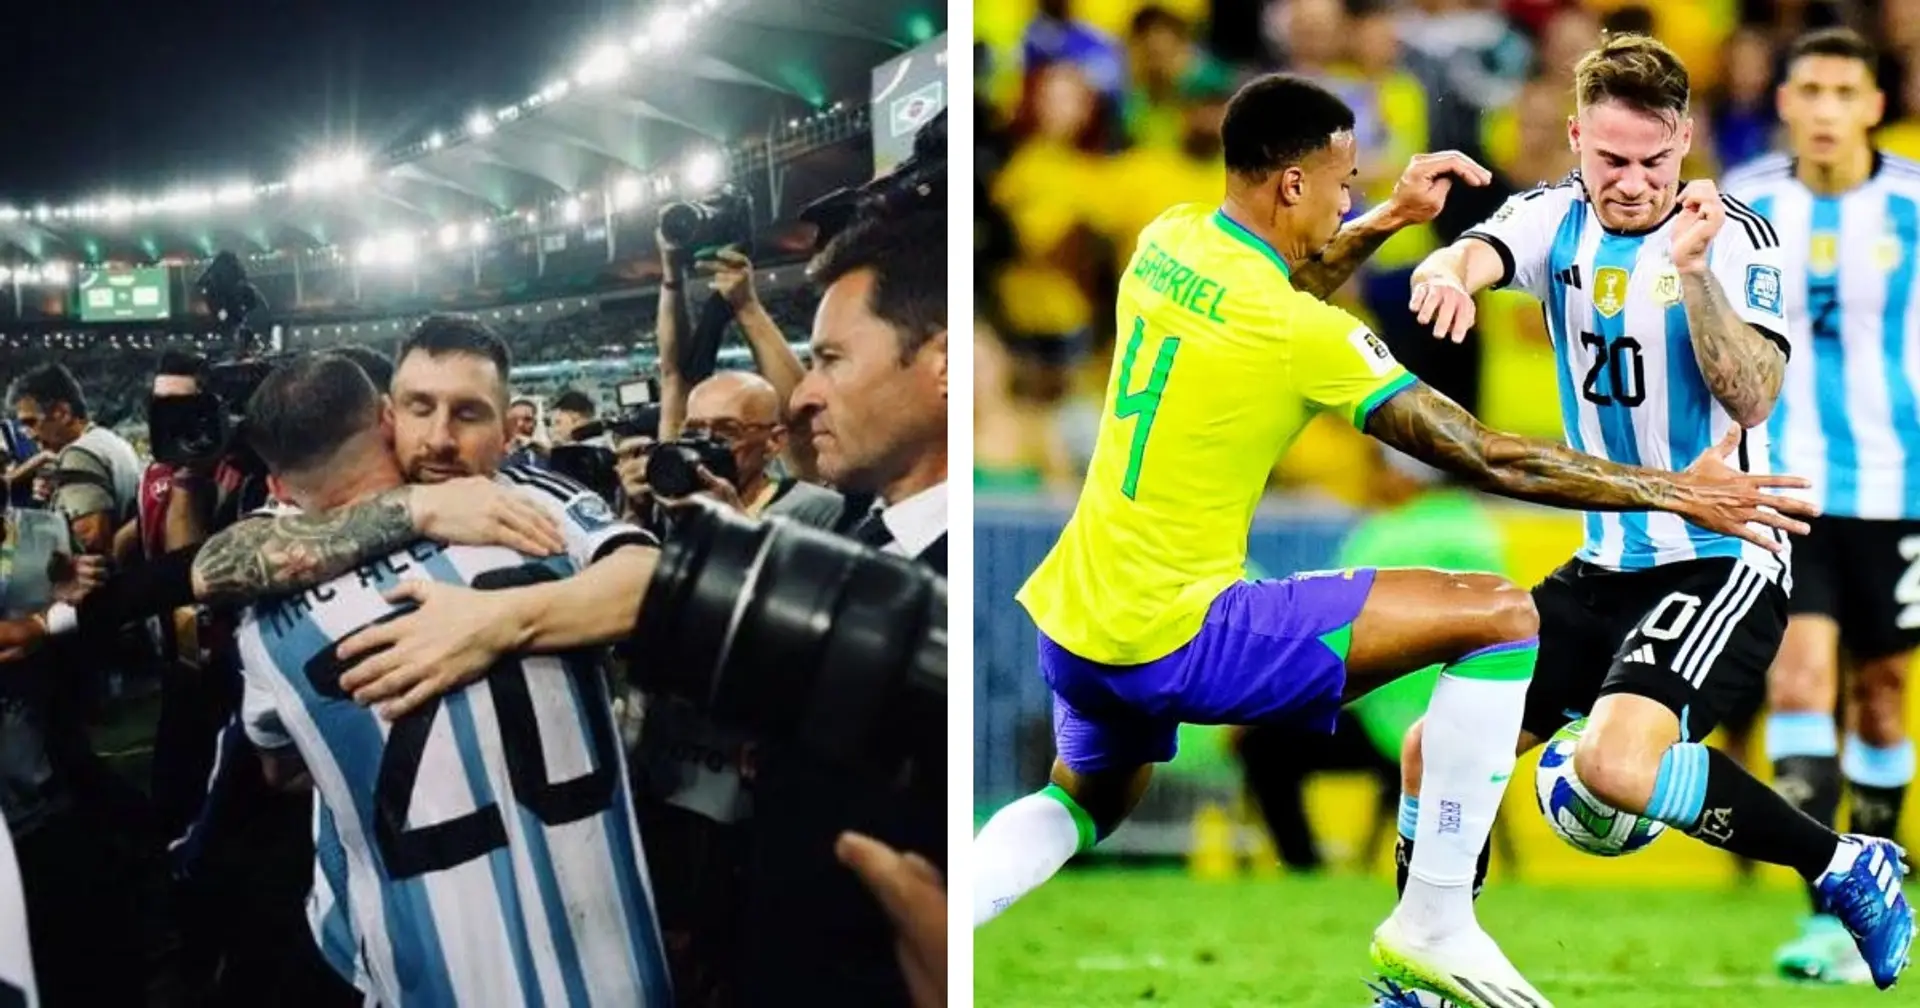 'It's a p*rn': Mac Allister on Argentina's win over Brazil at Maracana after violent brawl breaks out in the stands